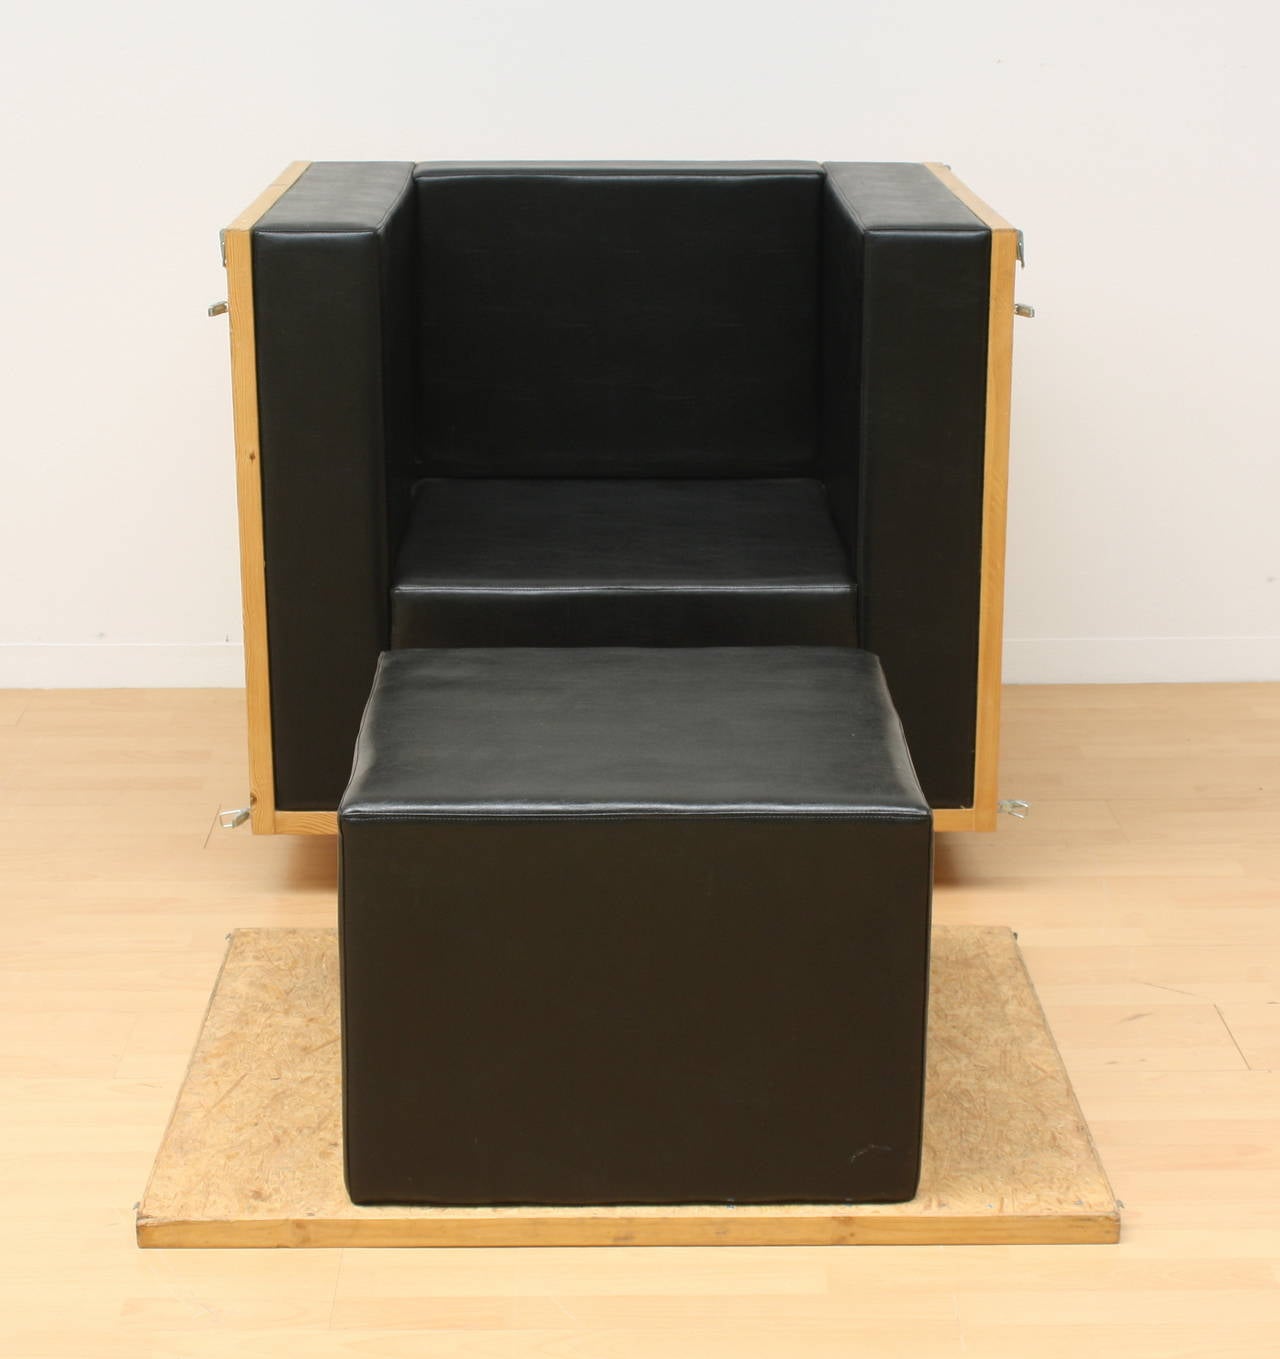 An armchair in a crate box, prototype, plywood, solid pine, metal hinges, vinyl upholstery material. This work is from an edition of 100 by Ezri Tarazi 2005.
Exhibited in Israel, New York, Istanbul and Basel.